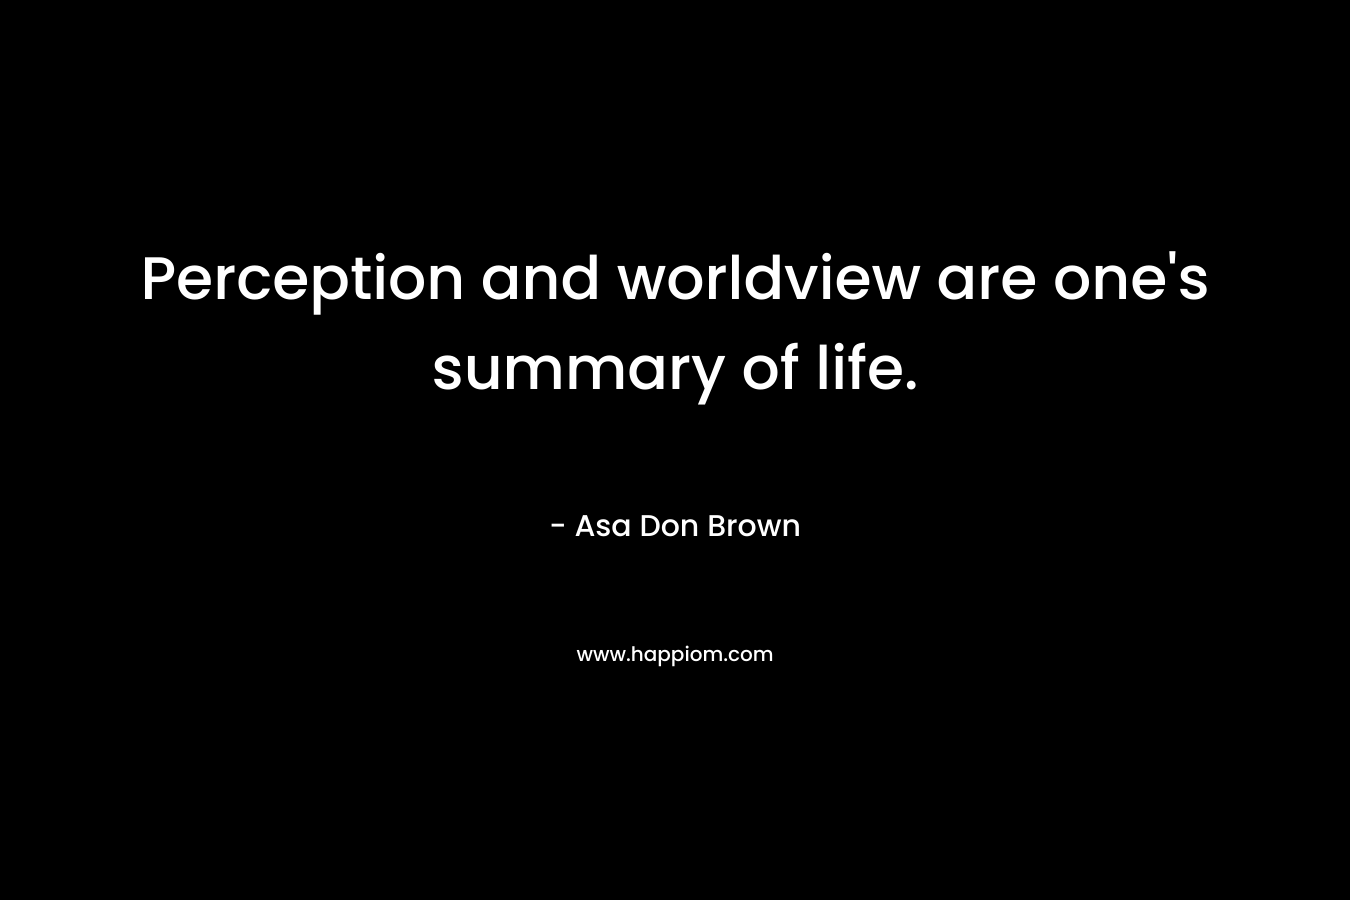 Perception and worldview are one's summary of life.